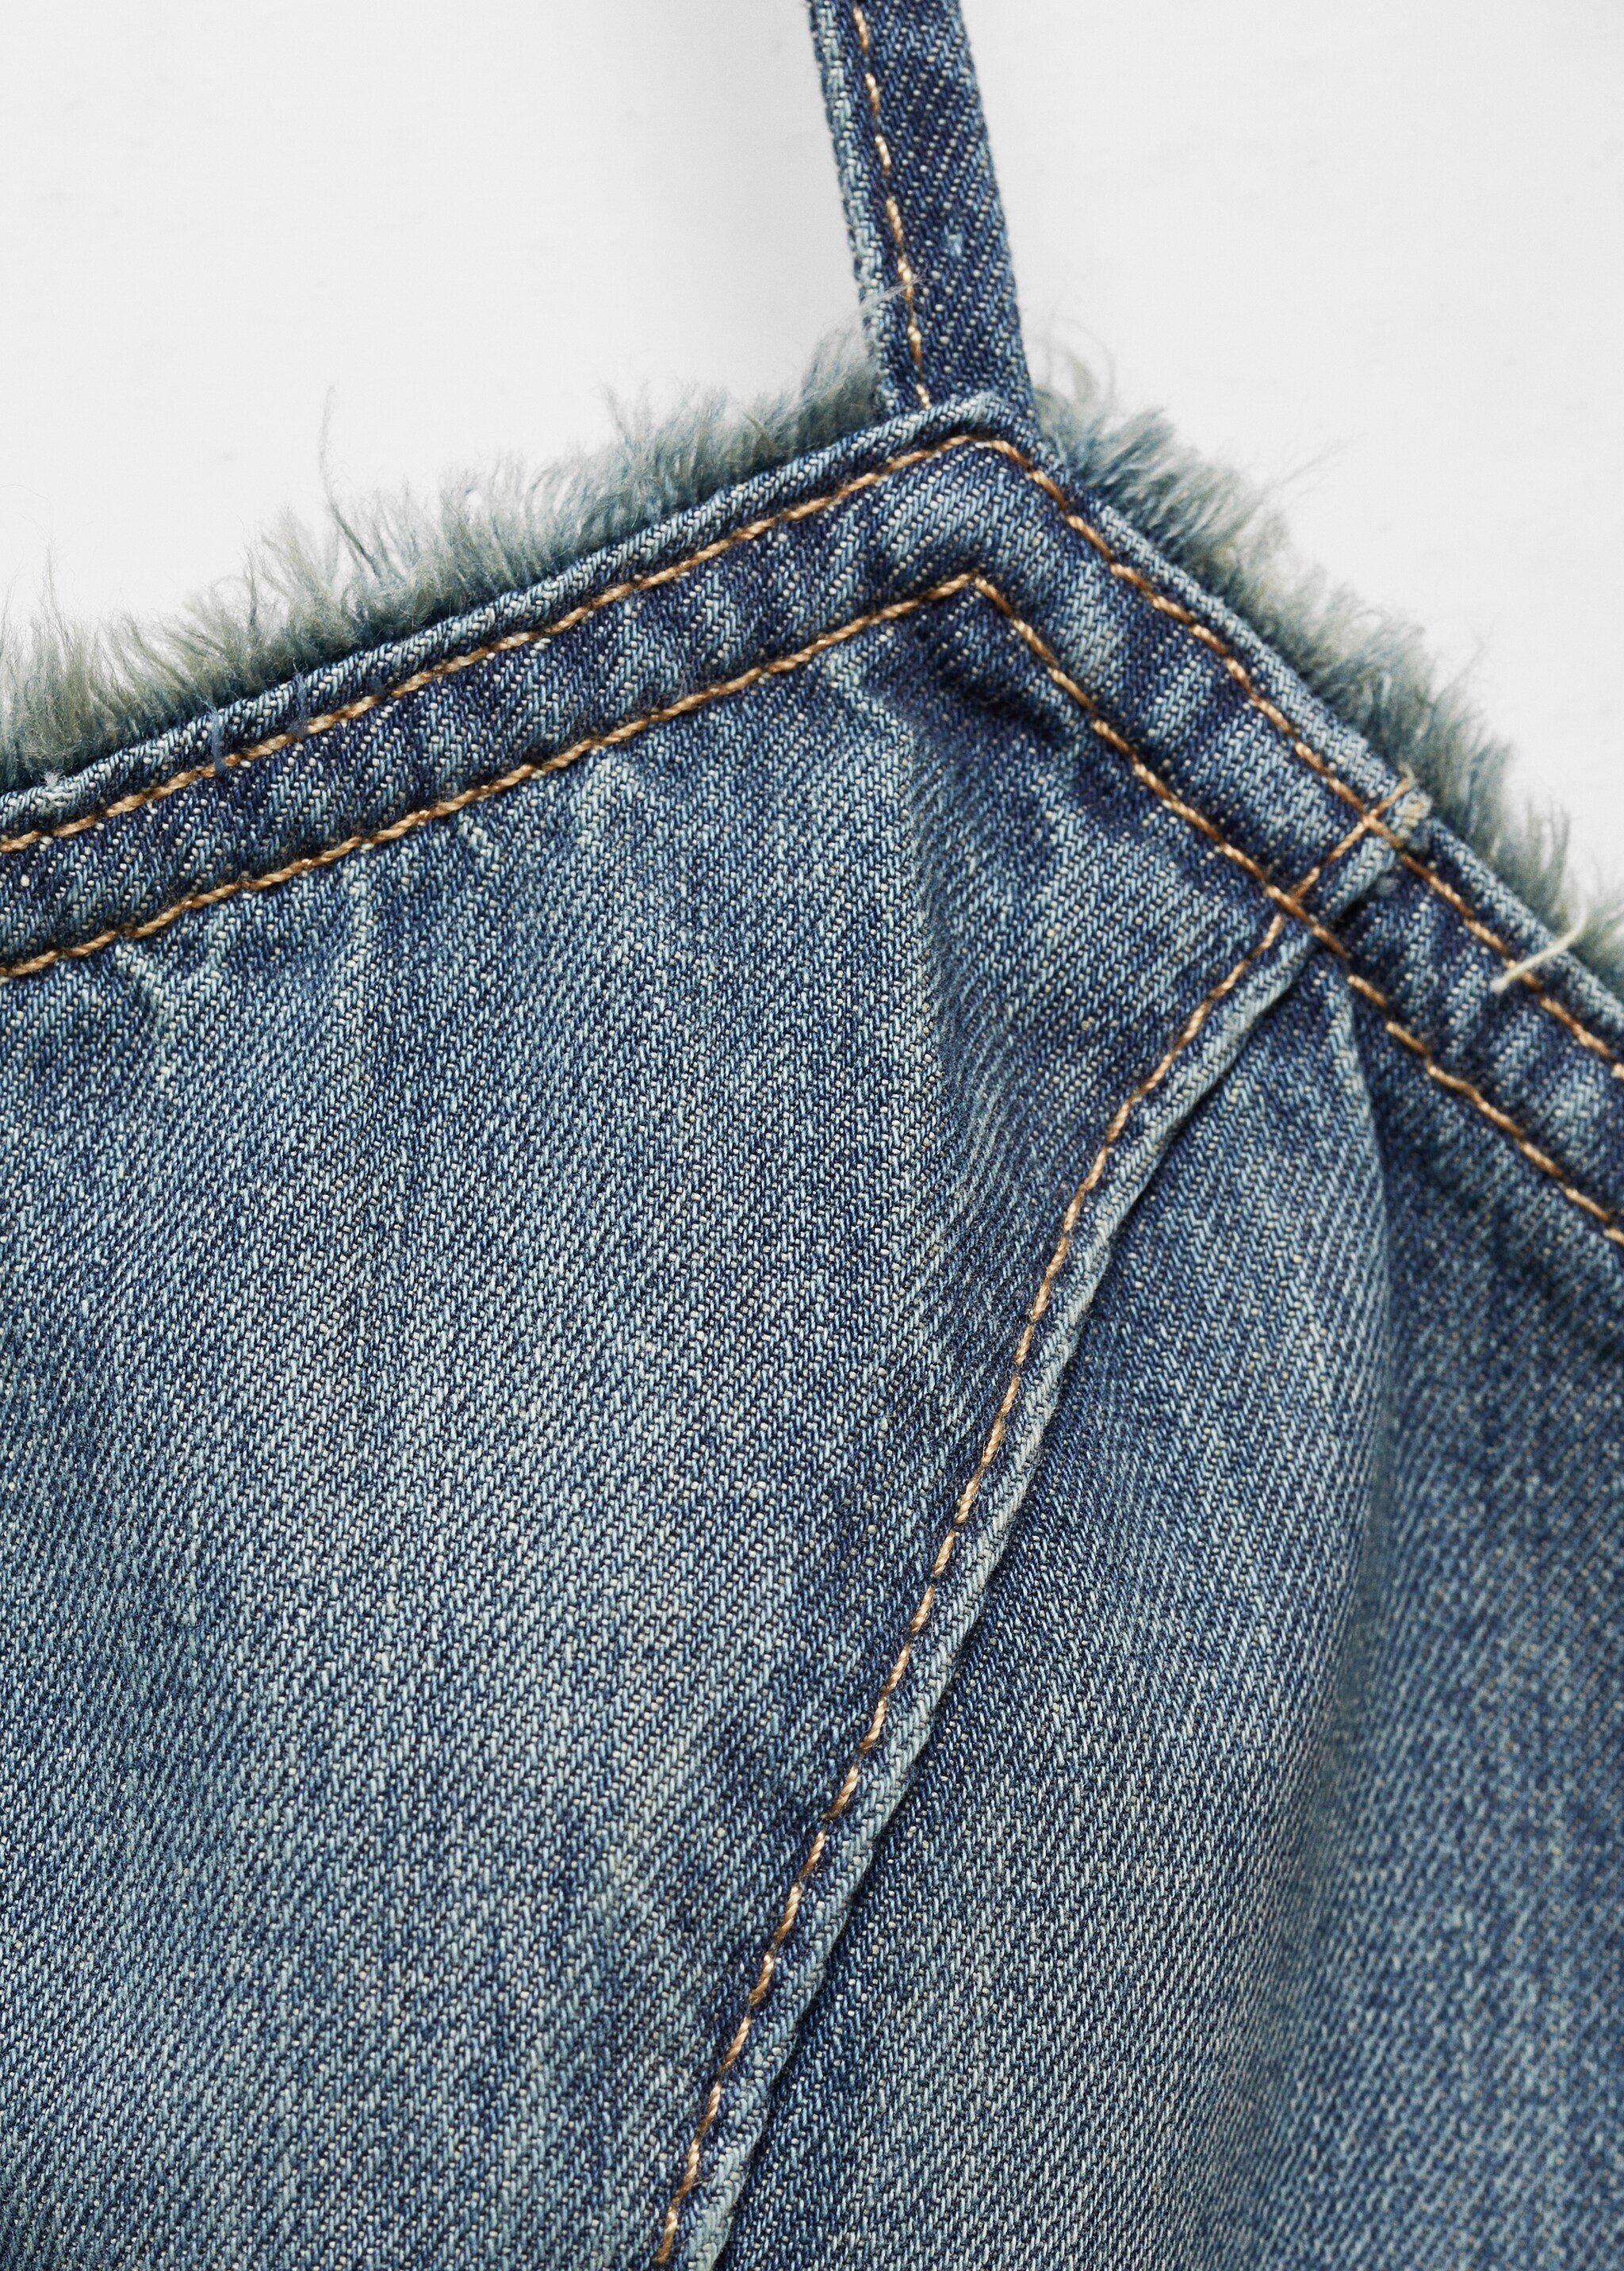 Denim top with frayed ends - Details of the article 8